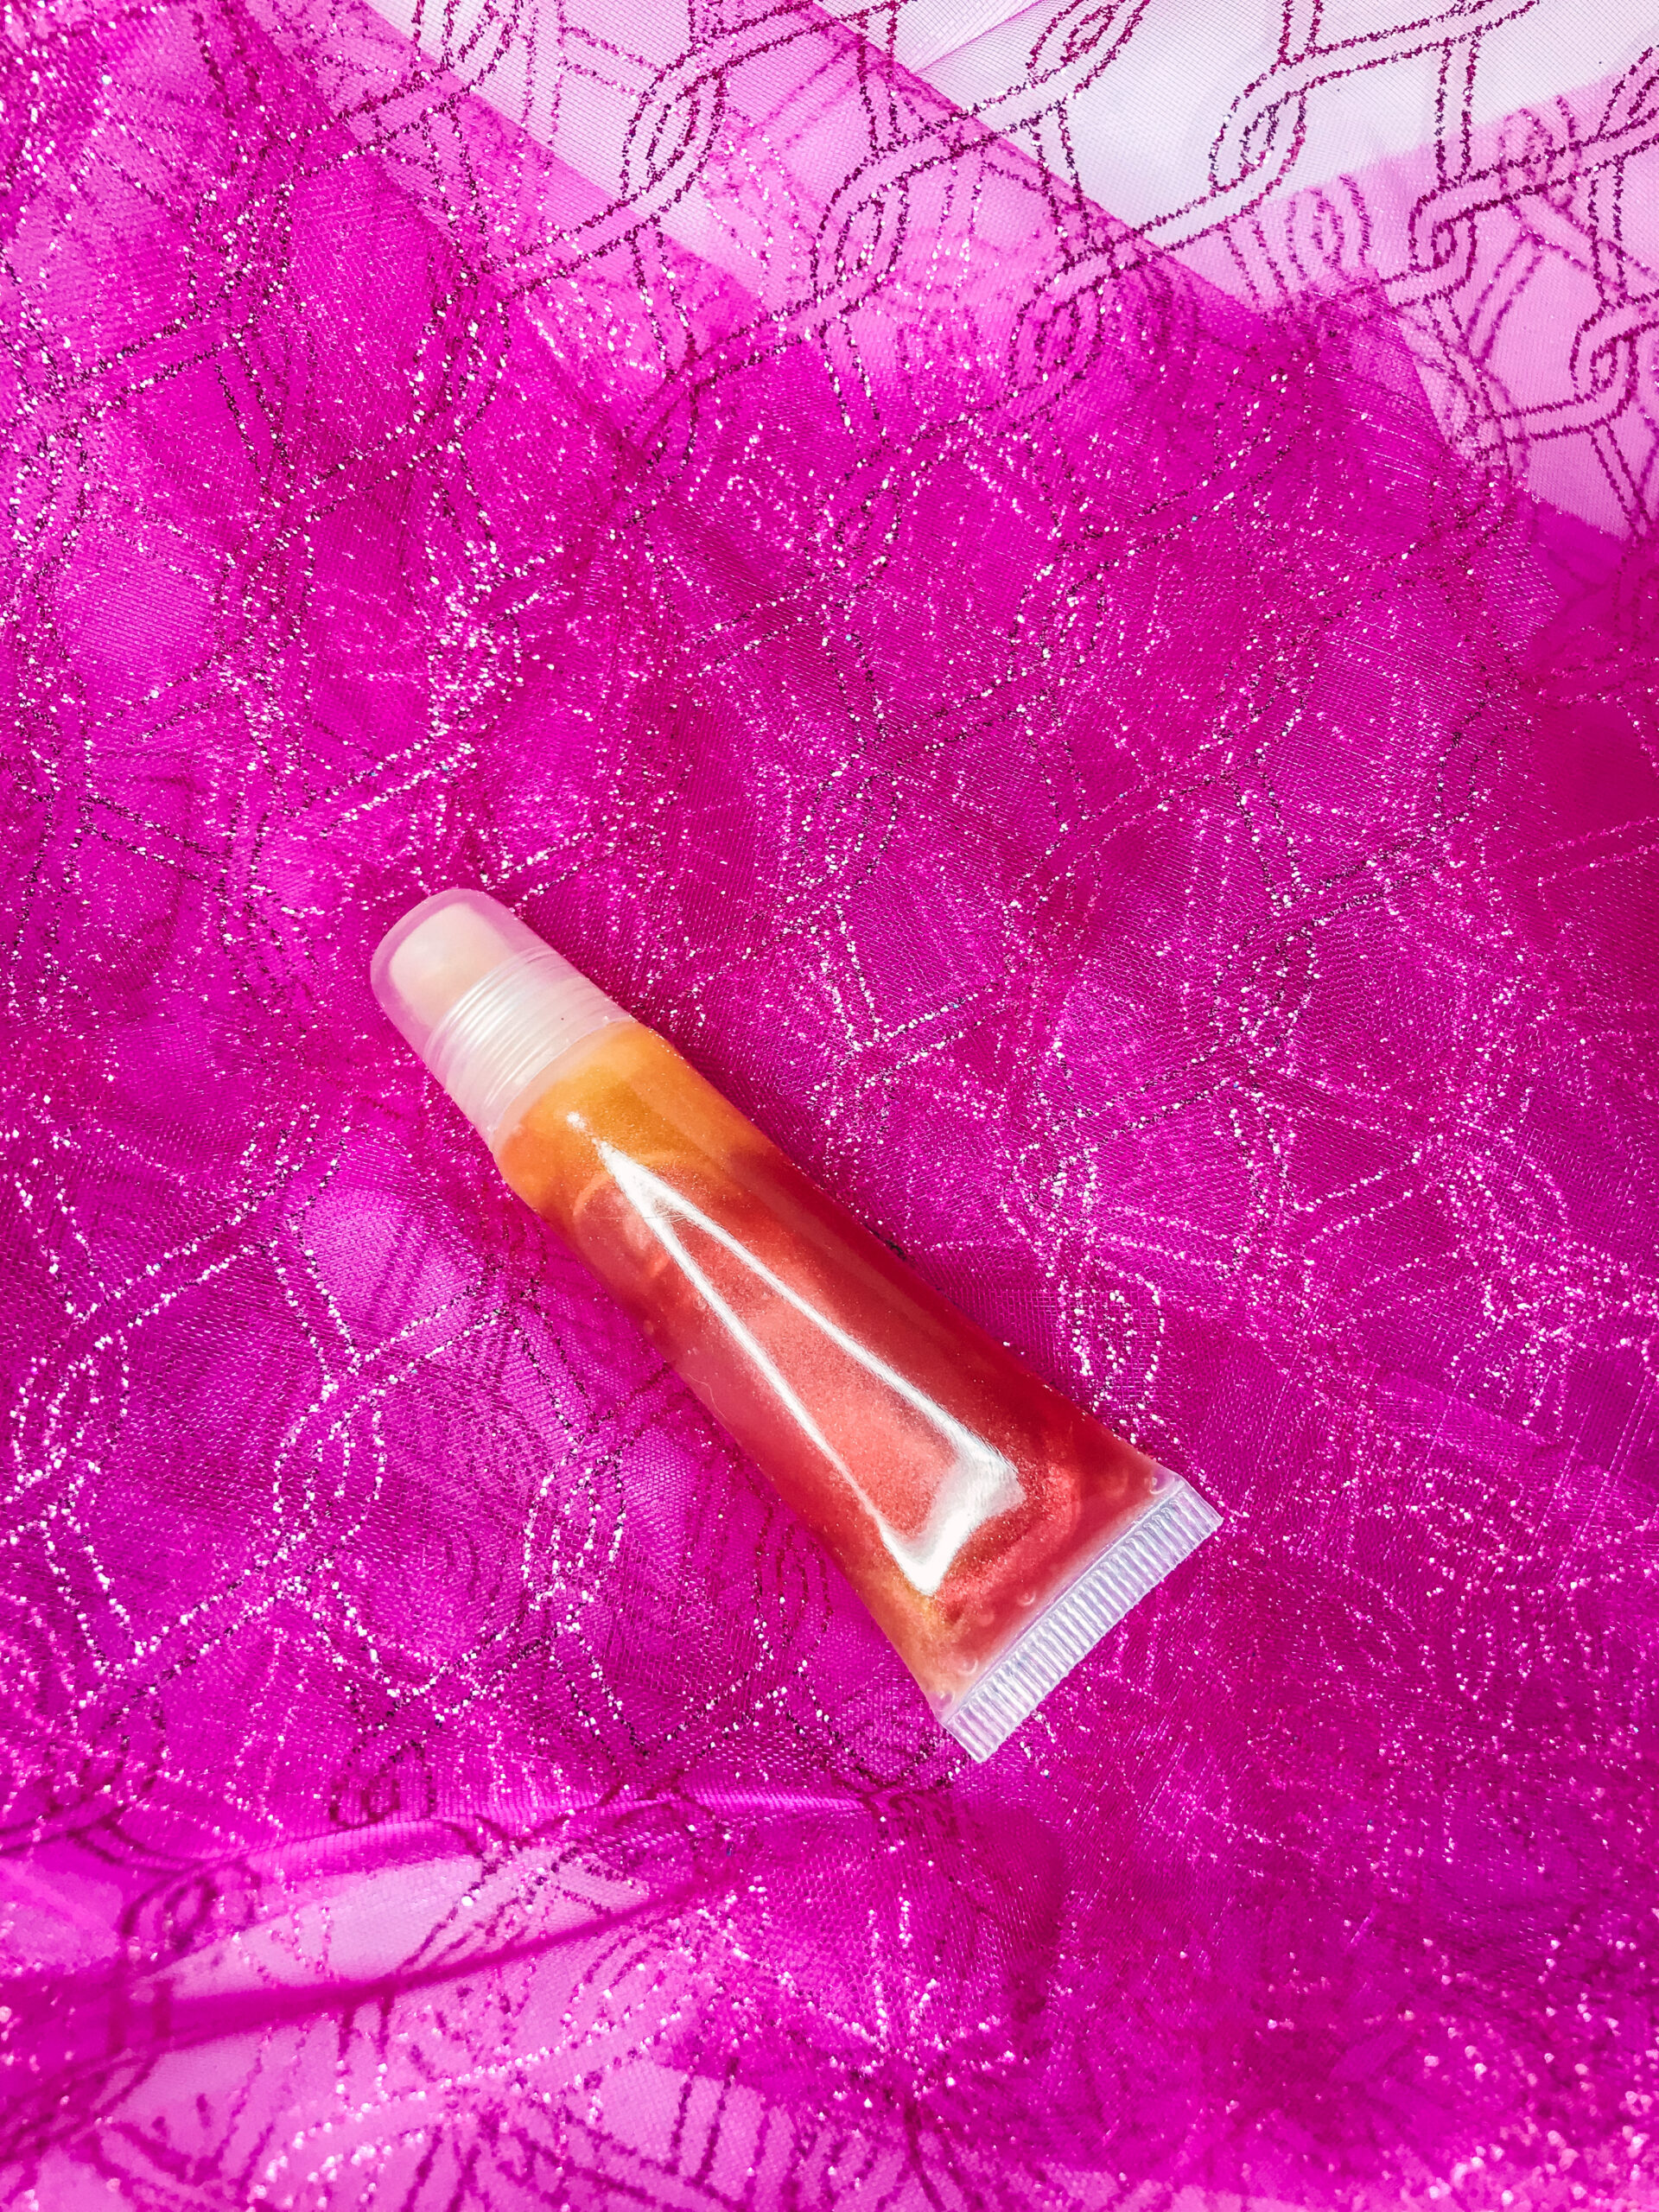 yellow-red ombre tube lip gloss